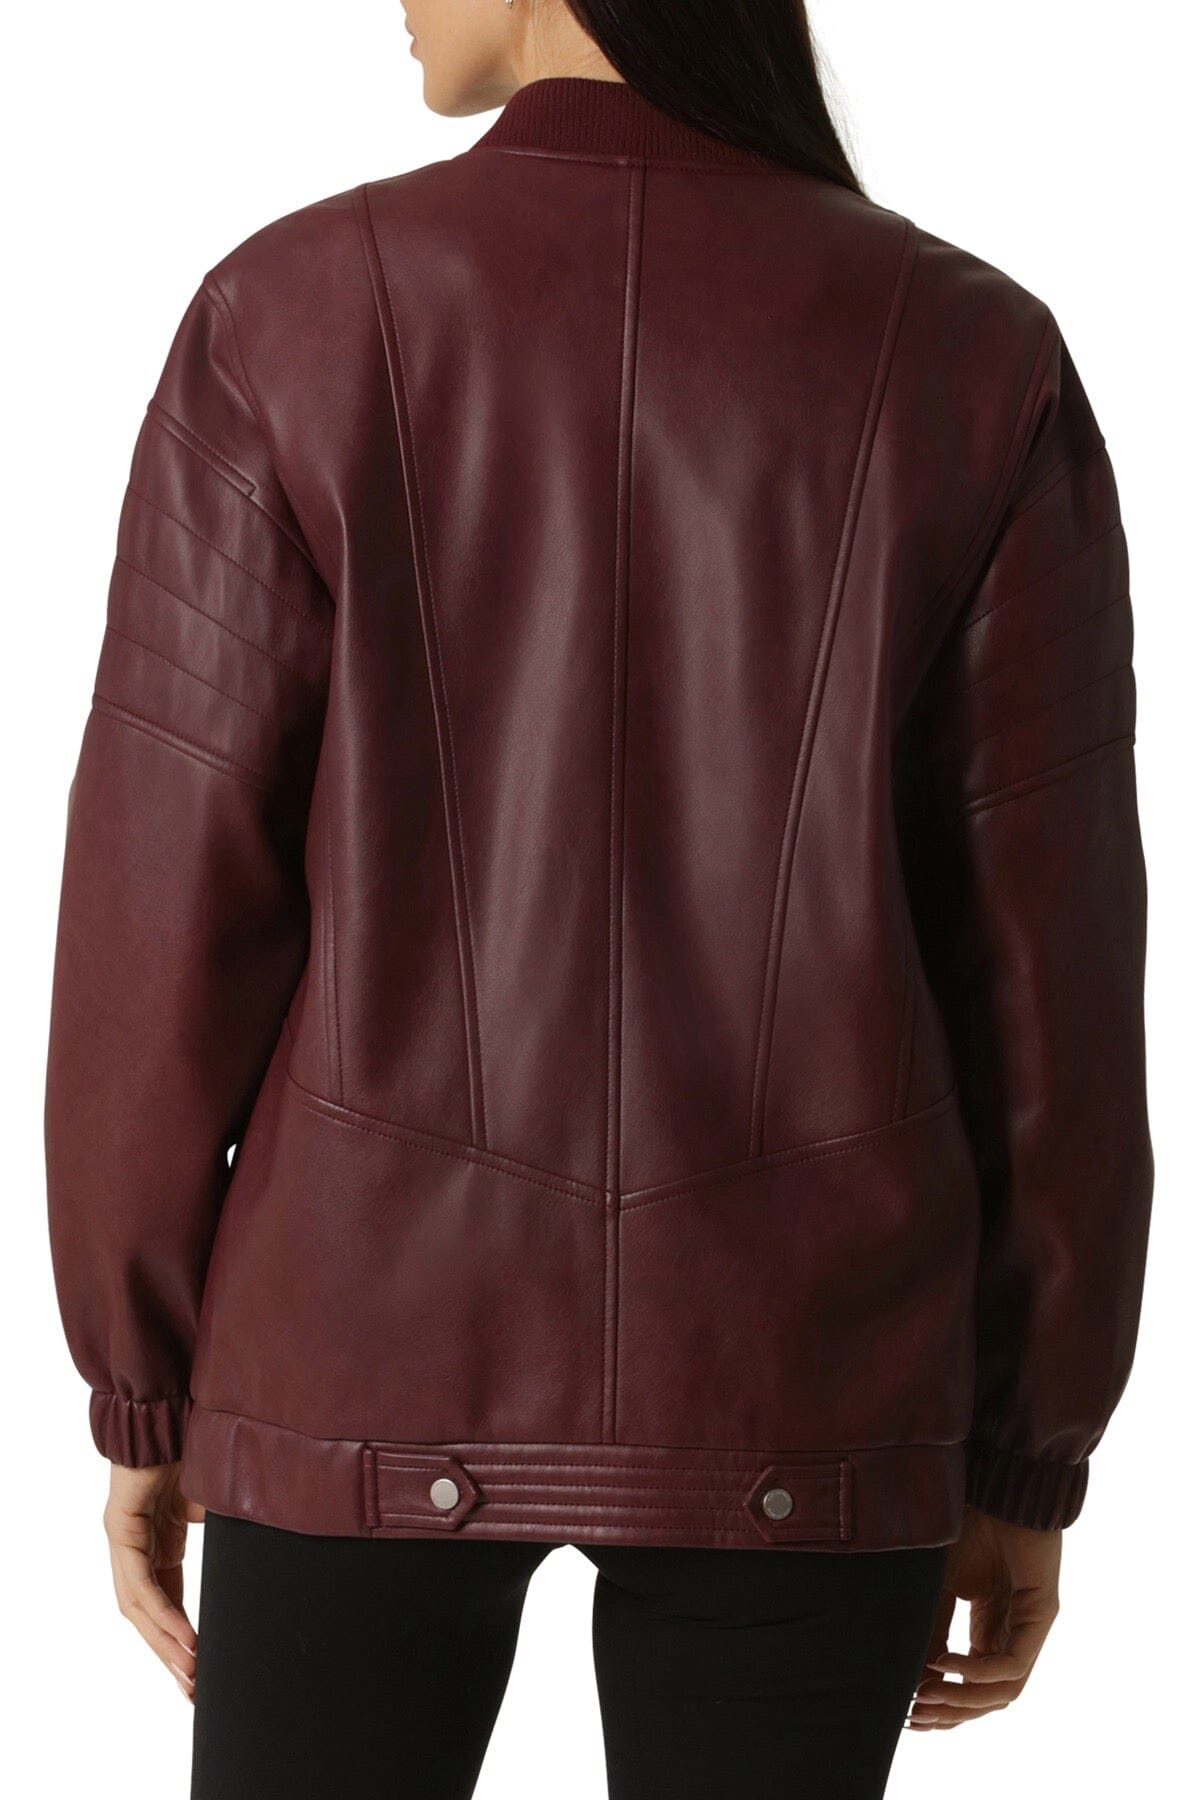 Zinfandel red faux ever vegan leather relaxed bomber jacket coat - women's figure flattering fashion jackets outerwear for fall 2023